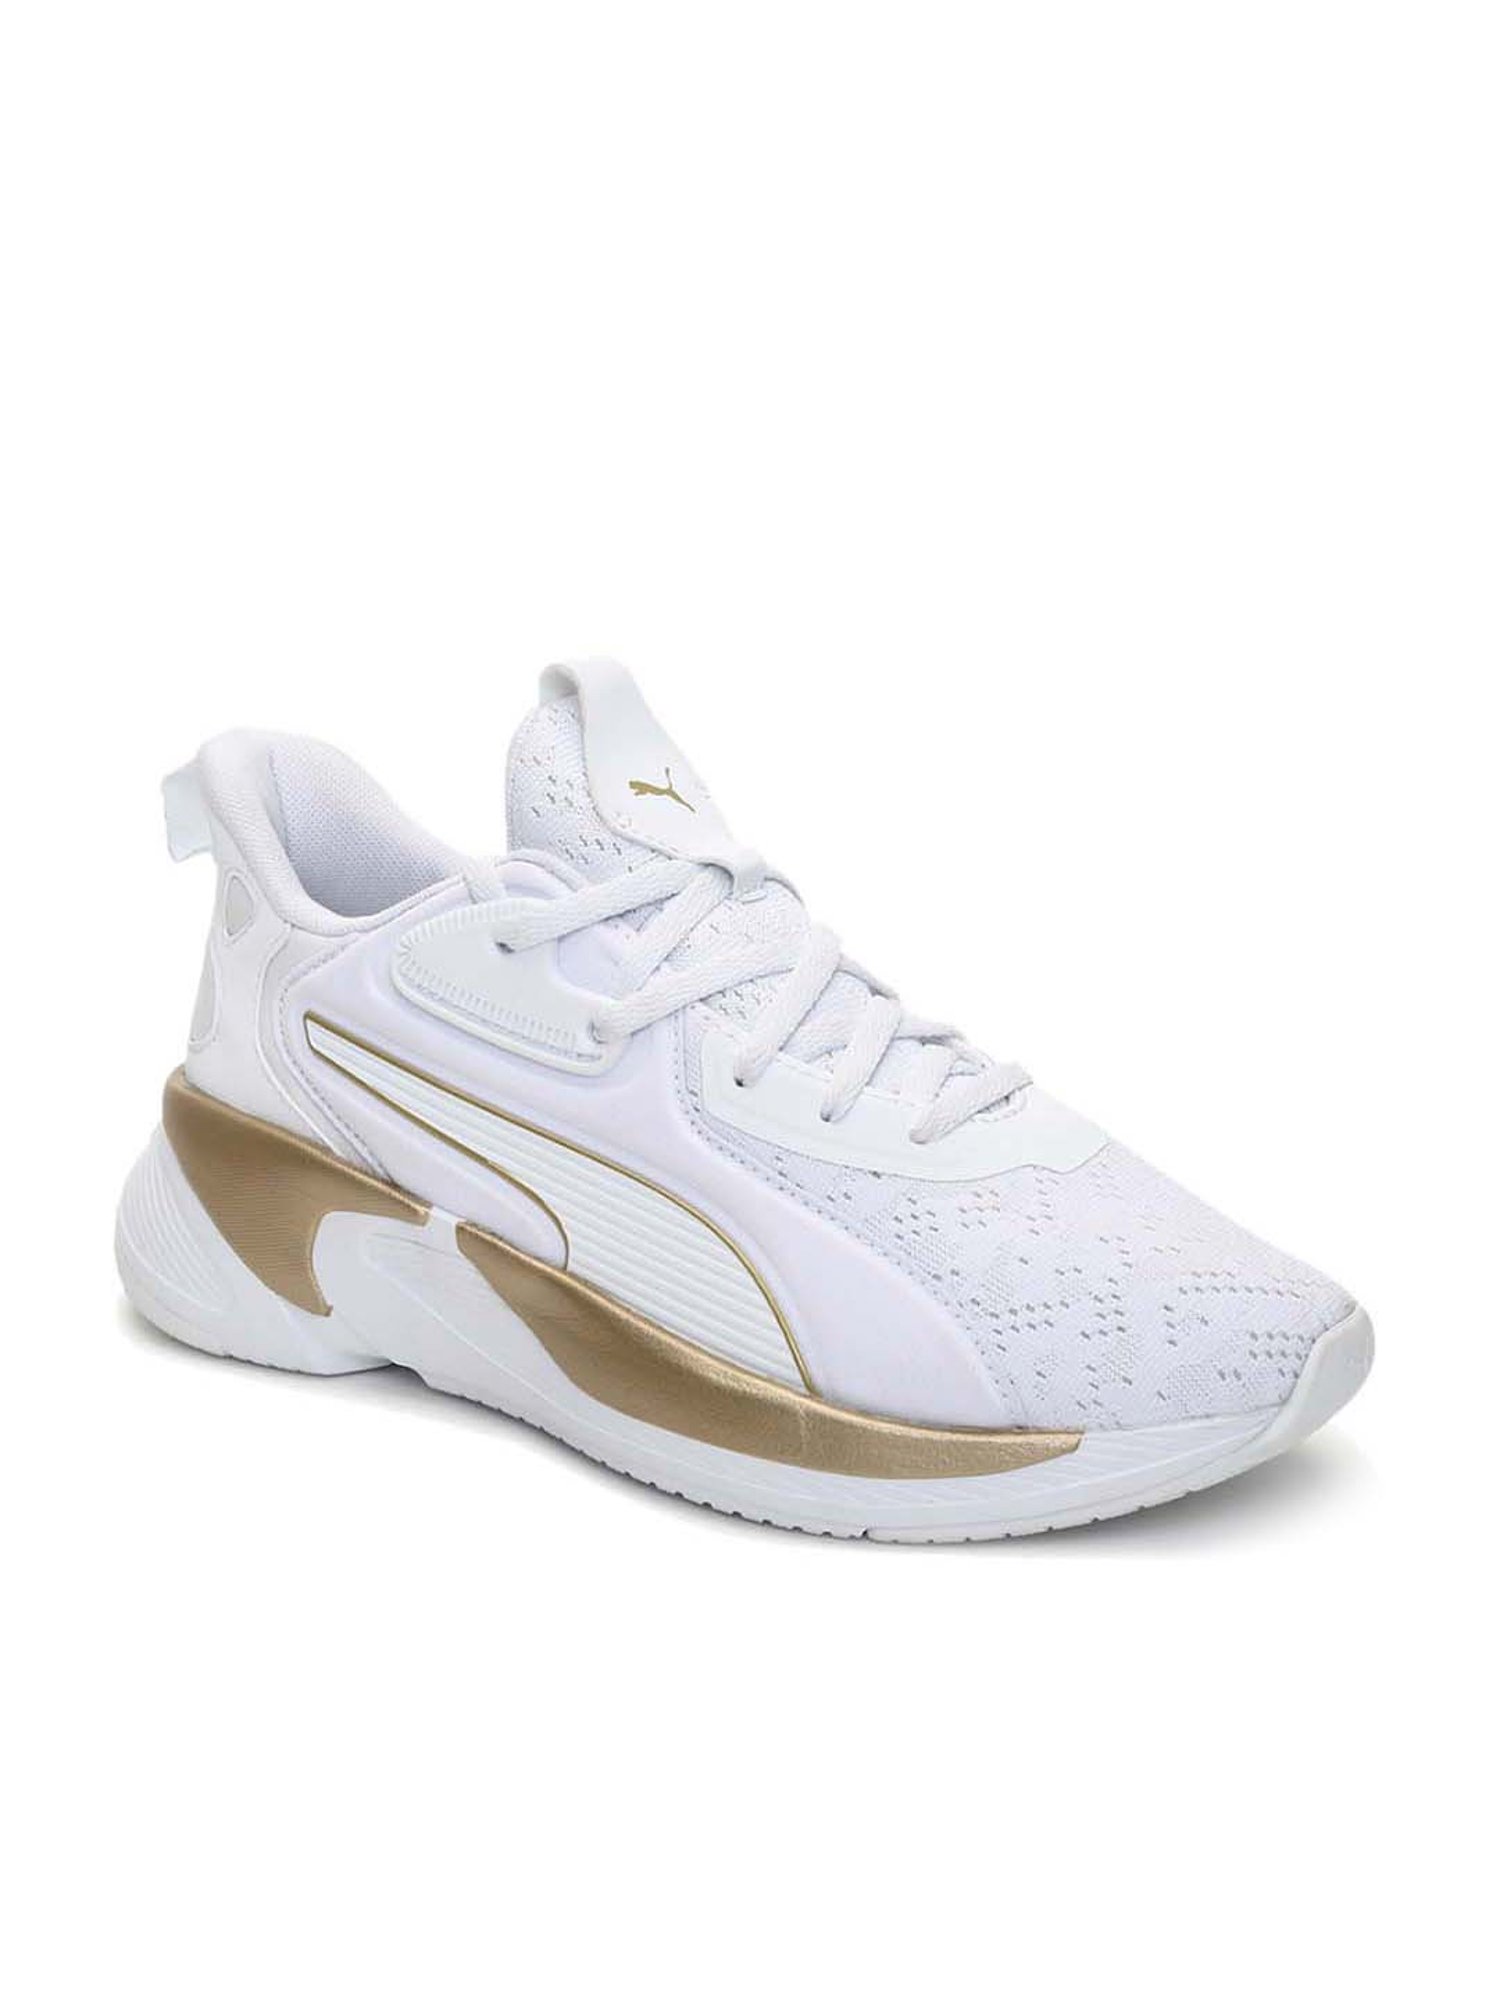 RS-X 'Women On The Ball' Women's Sneakers | PUMA